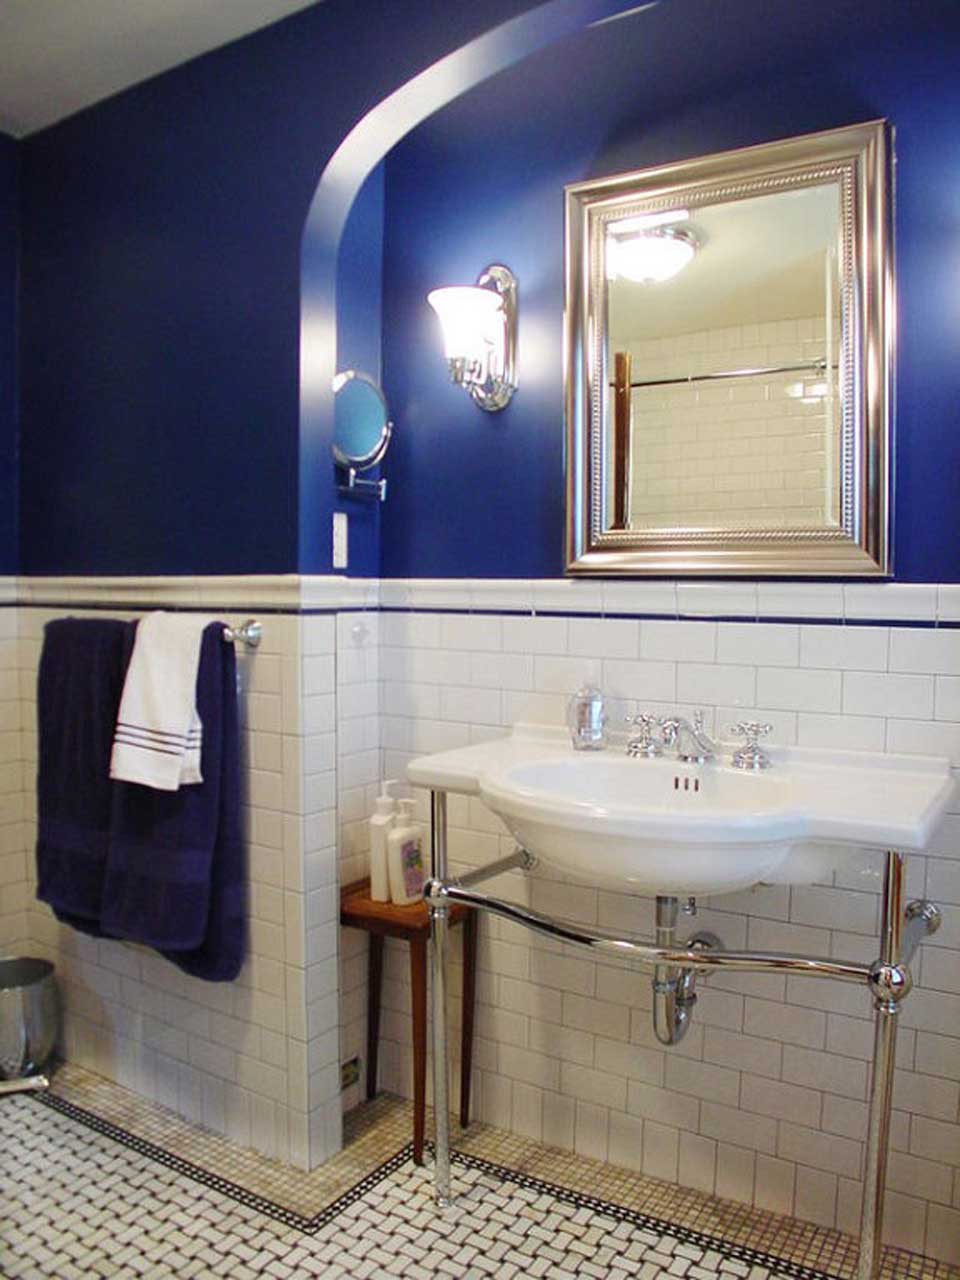 White And Bathroom Extraordinary White And Blue Themed Bathroom Design Ideas With Modern Towel Hanger Design And Classy Wall Lamps Idea Also Interesting Vessel Sink Design Plus Elegance Ceramic Bathroom Floor Idea The New Contemporary Bathroom Design Ideas